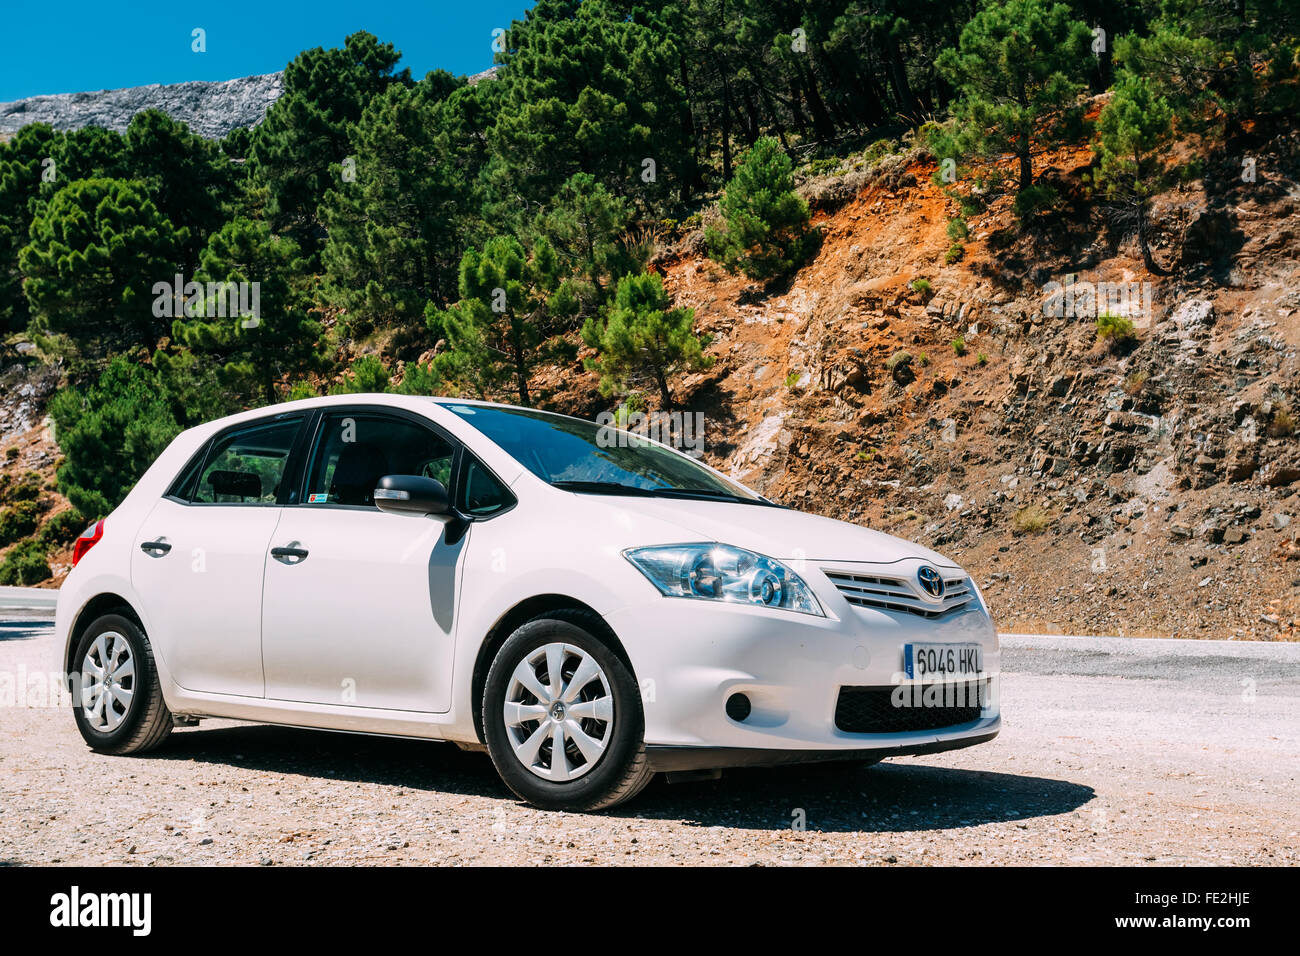 193 Toyota Auris Stock Photos, High-Res Pictures, and Images - Getty Images